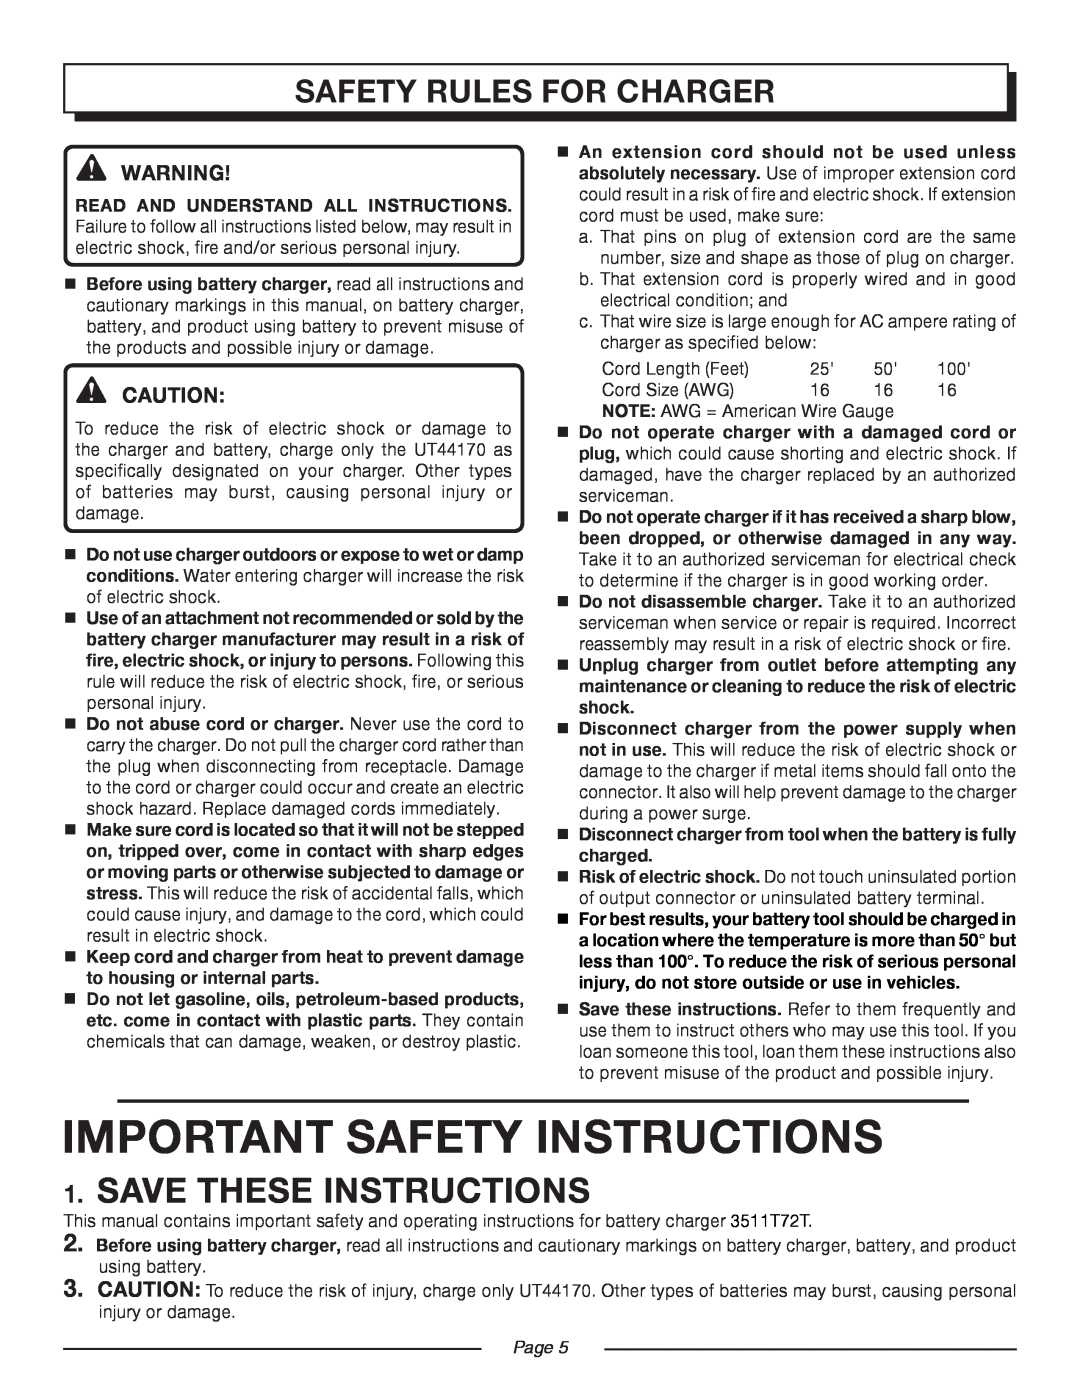 Homelite UT44170 manual Save These Instructions, Safety Rules For Charger, Important Safety Instructions, Page  